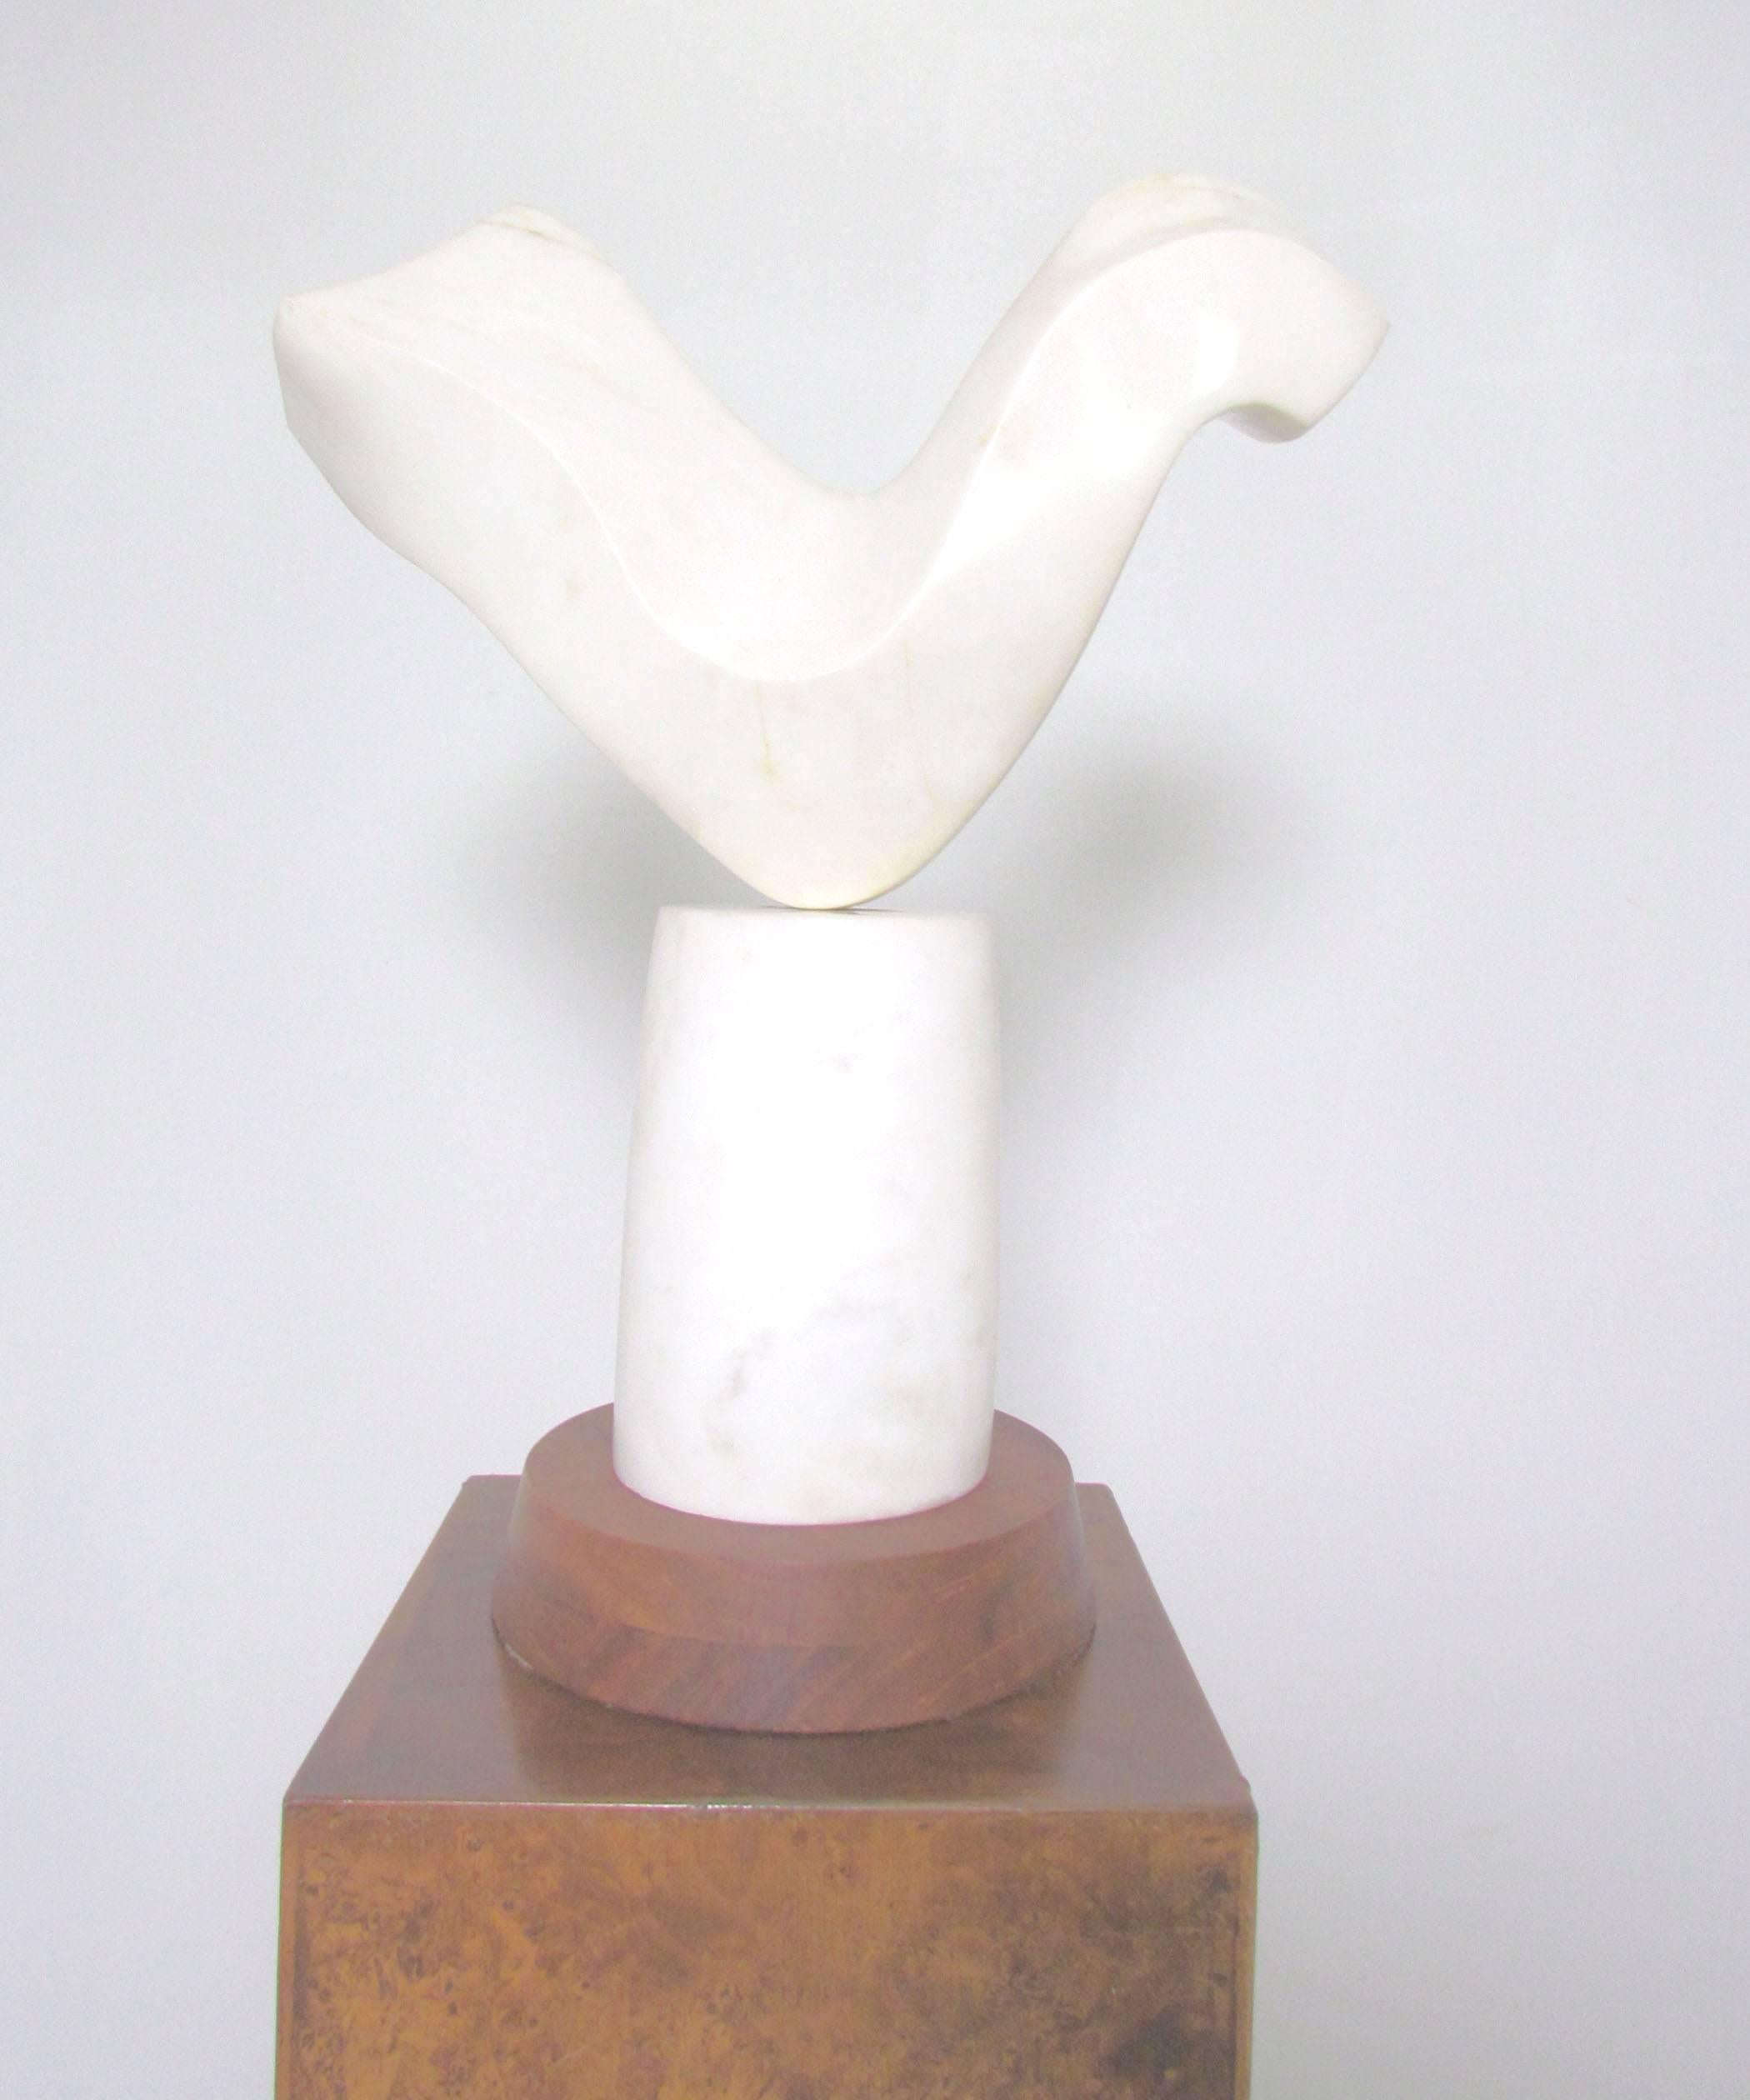 Abstract marble sculpture, signed M. Sokell and dated 1969. Paired with an Italian burl wood display pedestal.

Sculpture measures 8.75” diameter at base, 16.5” wide, 21” high. Burl pedestal measures 11” square by 39 ½” high. Together, this